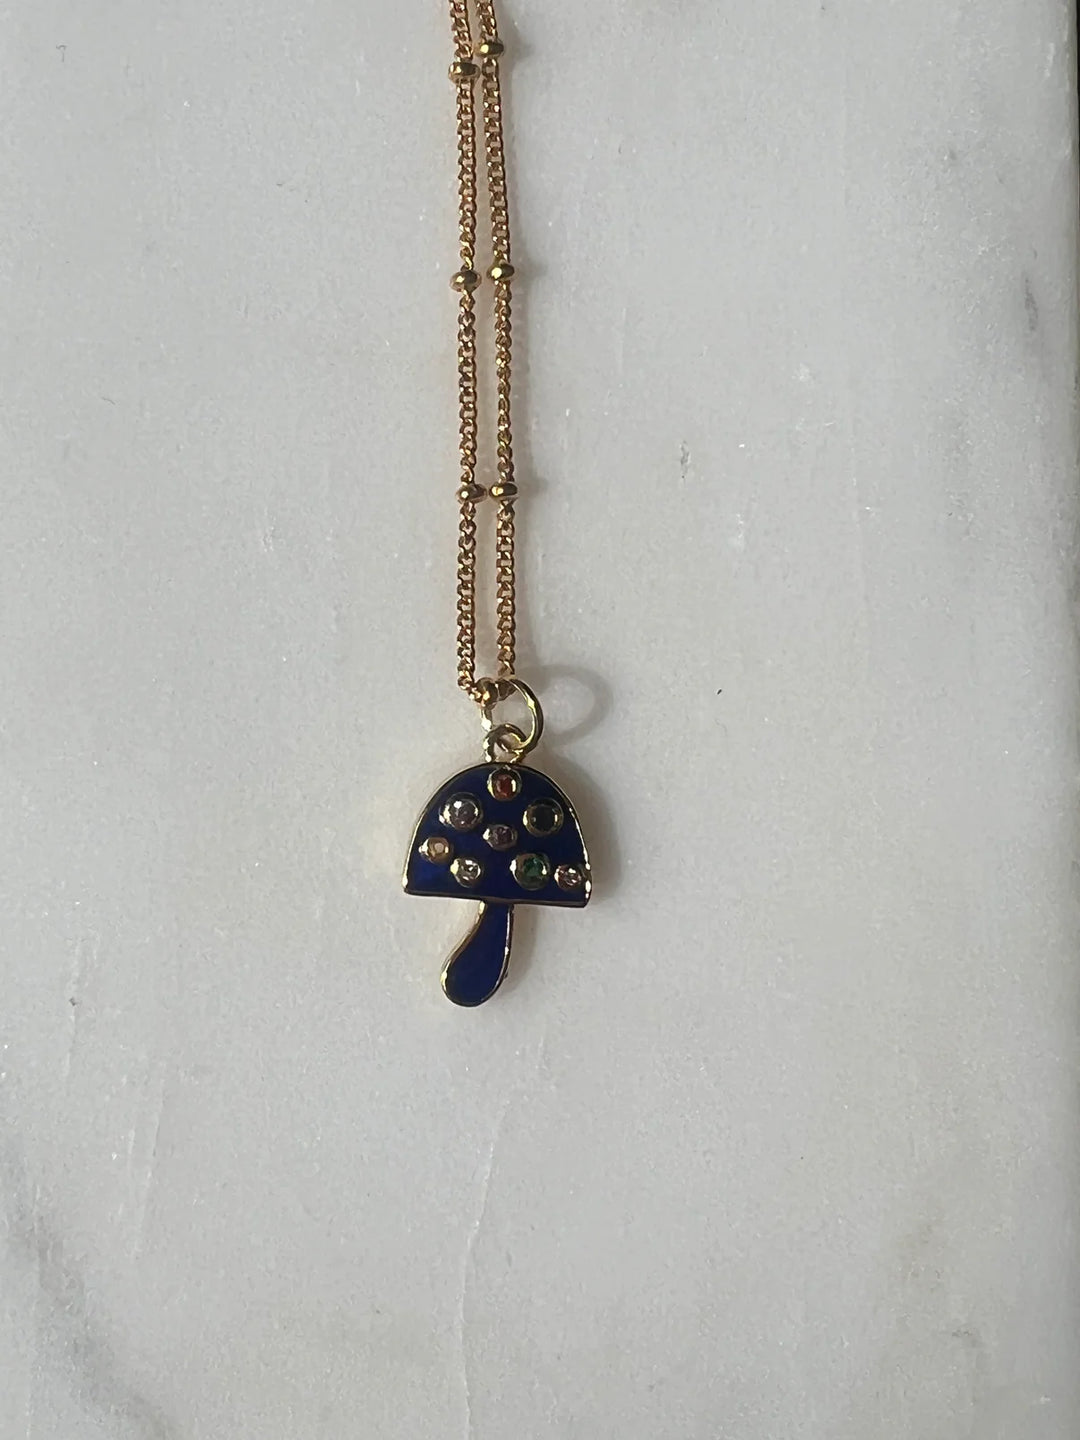 Necklace - 18KG Gold Filled with Pendants